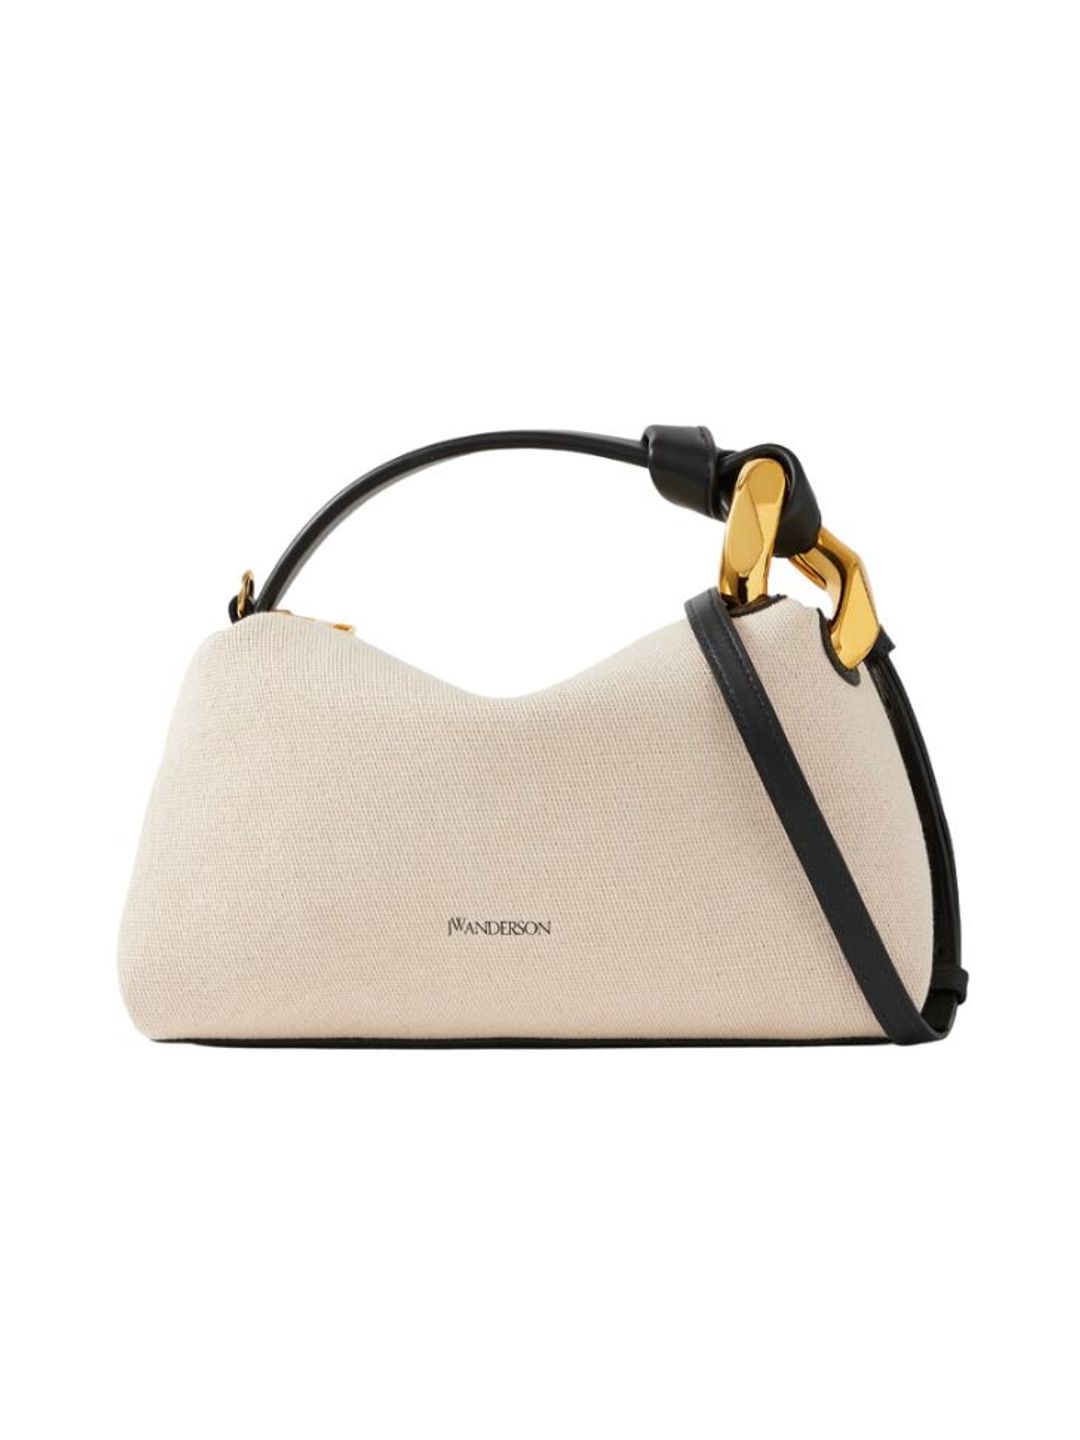 Cream bag with black strap and gold hardware 